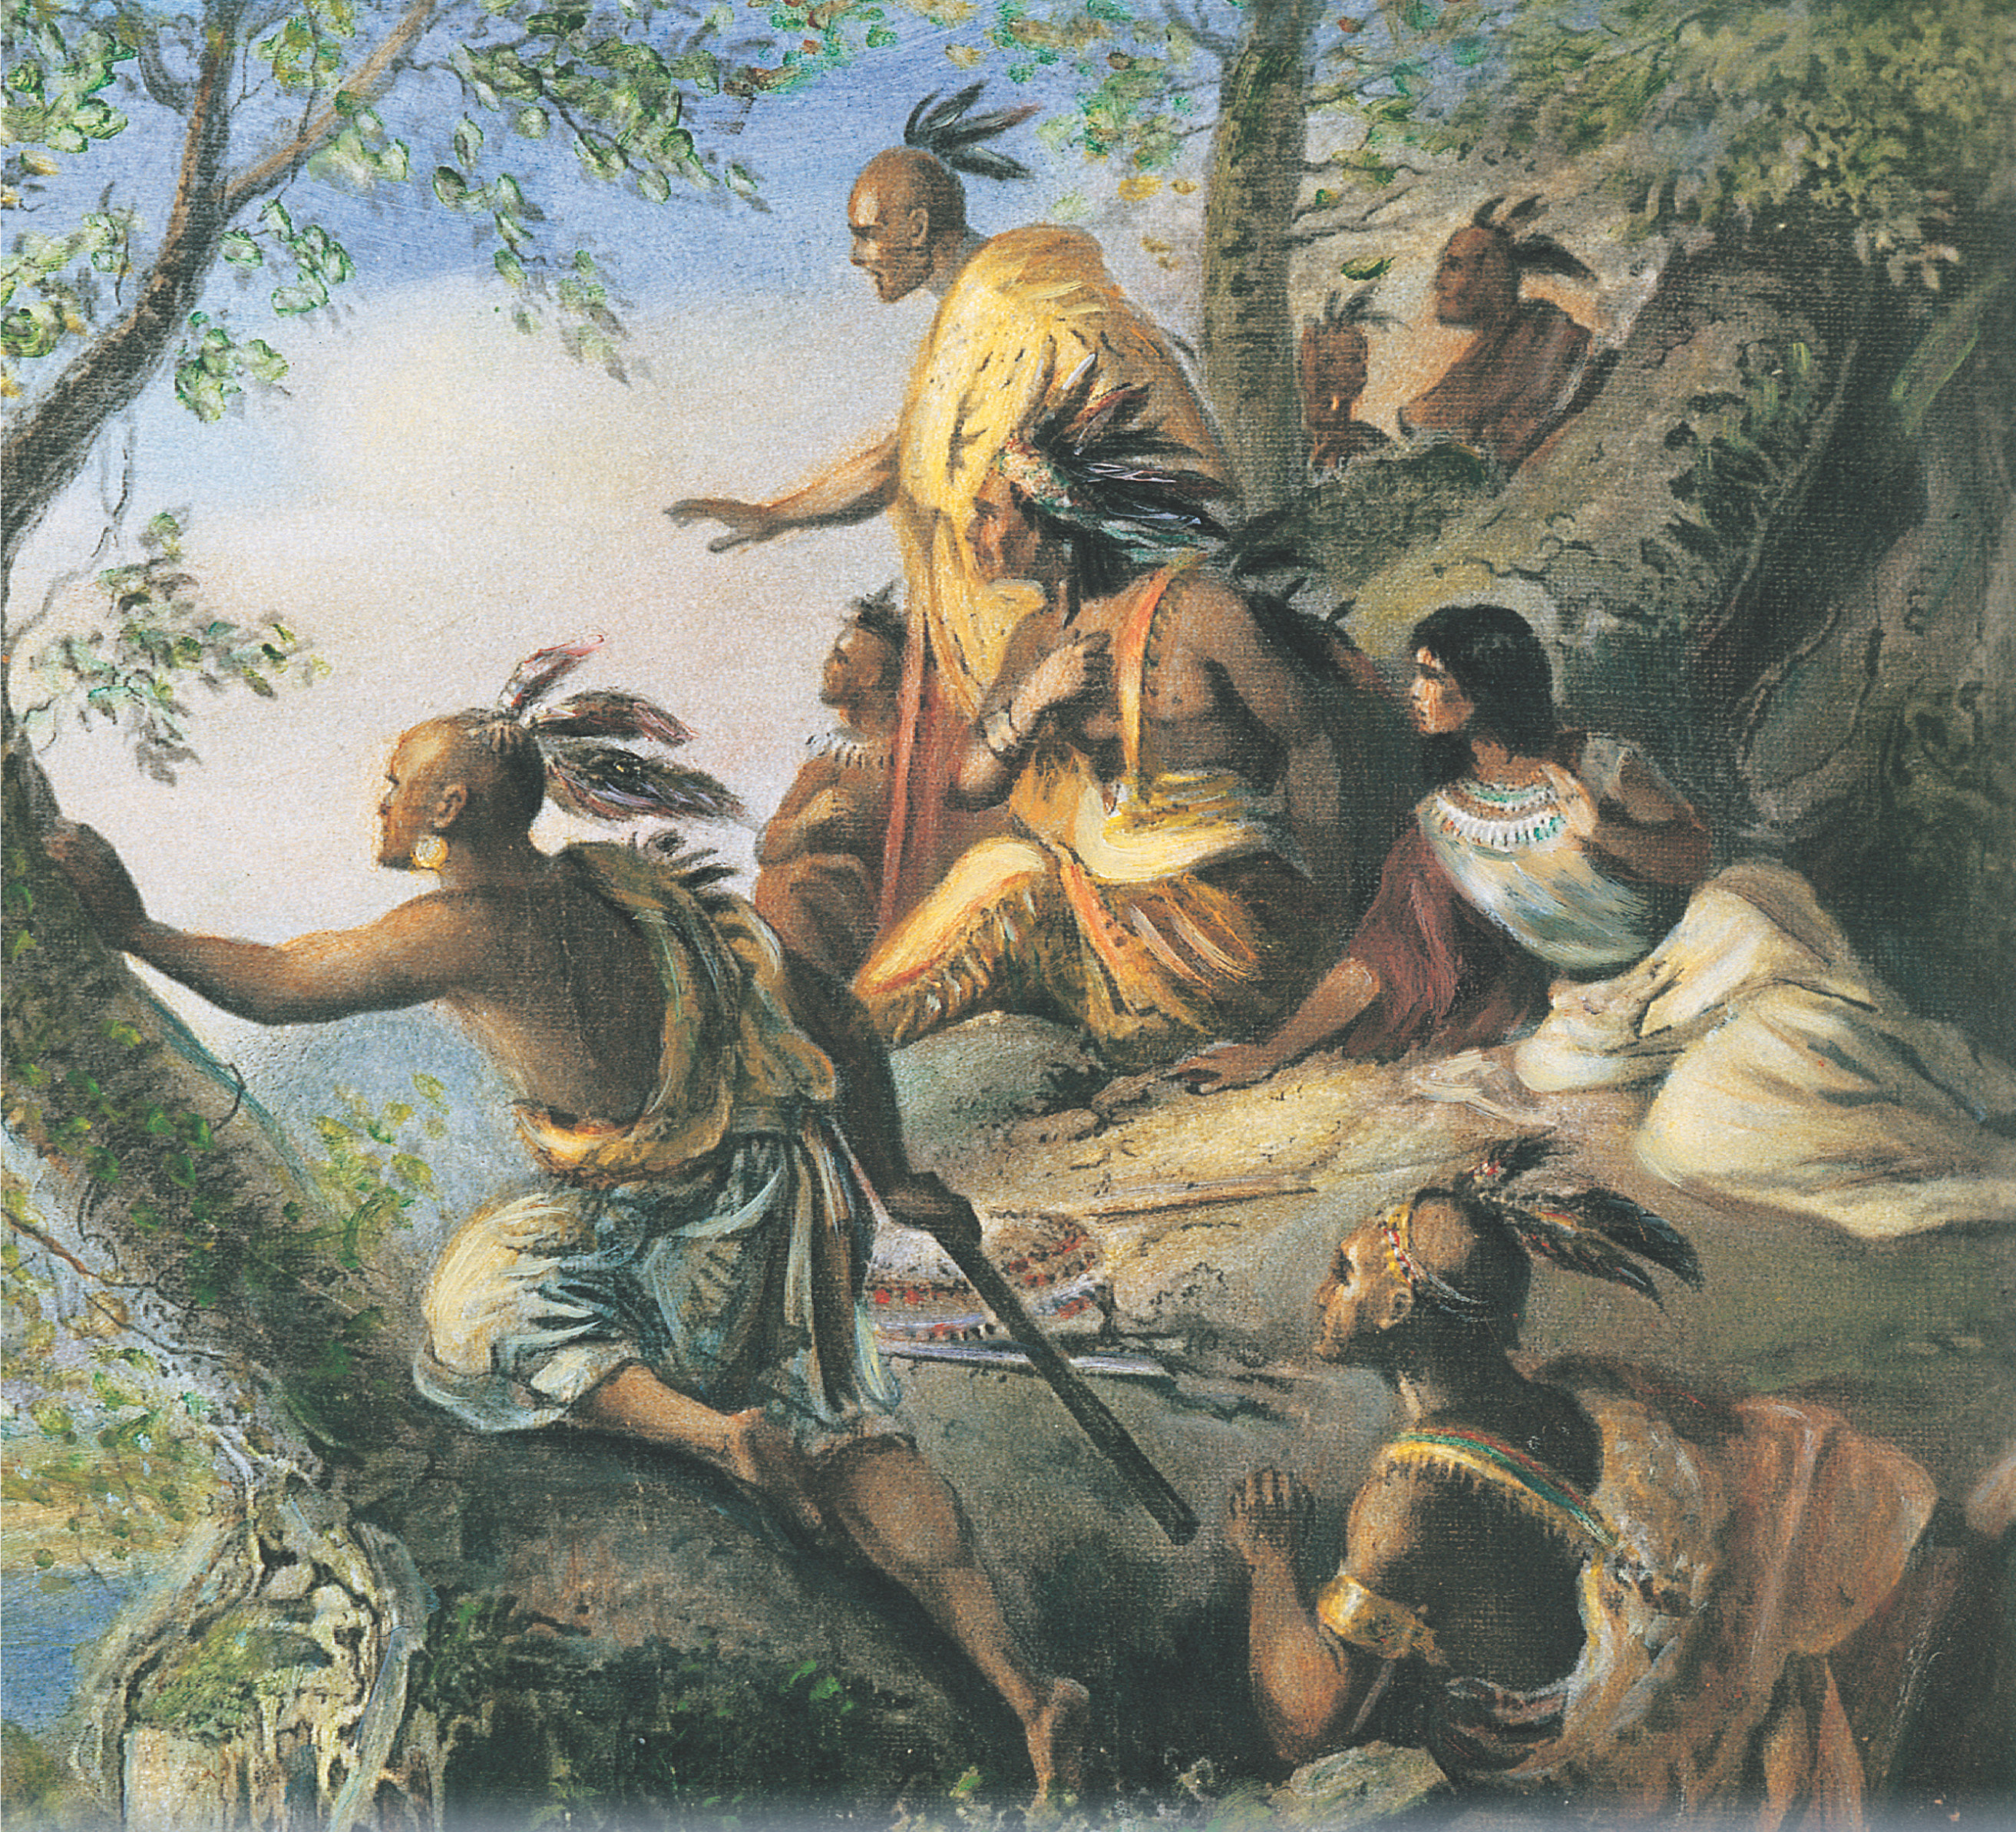 Painting depicts Native Americans wearing feather headdresses, gathered at the edge of the forest overlooking the water.